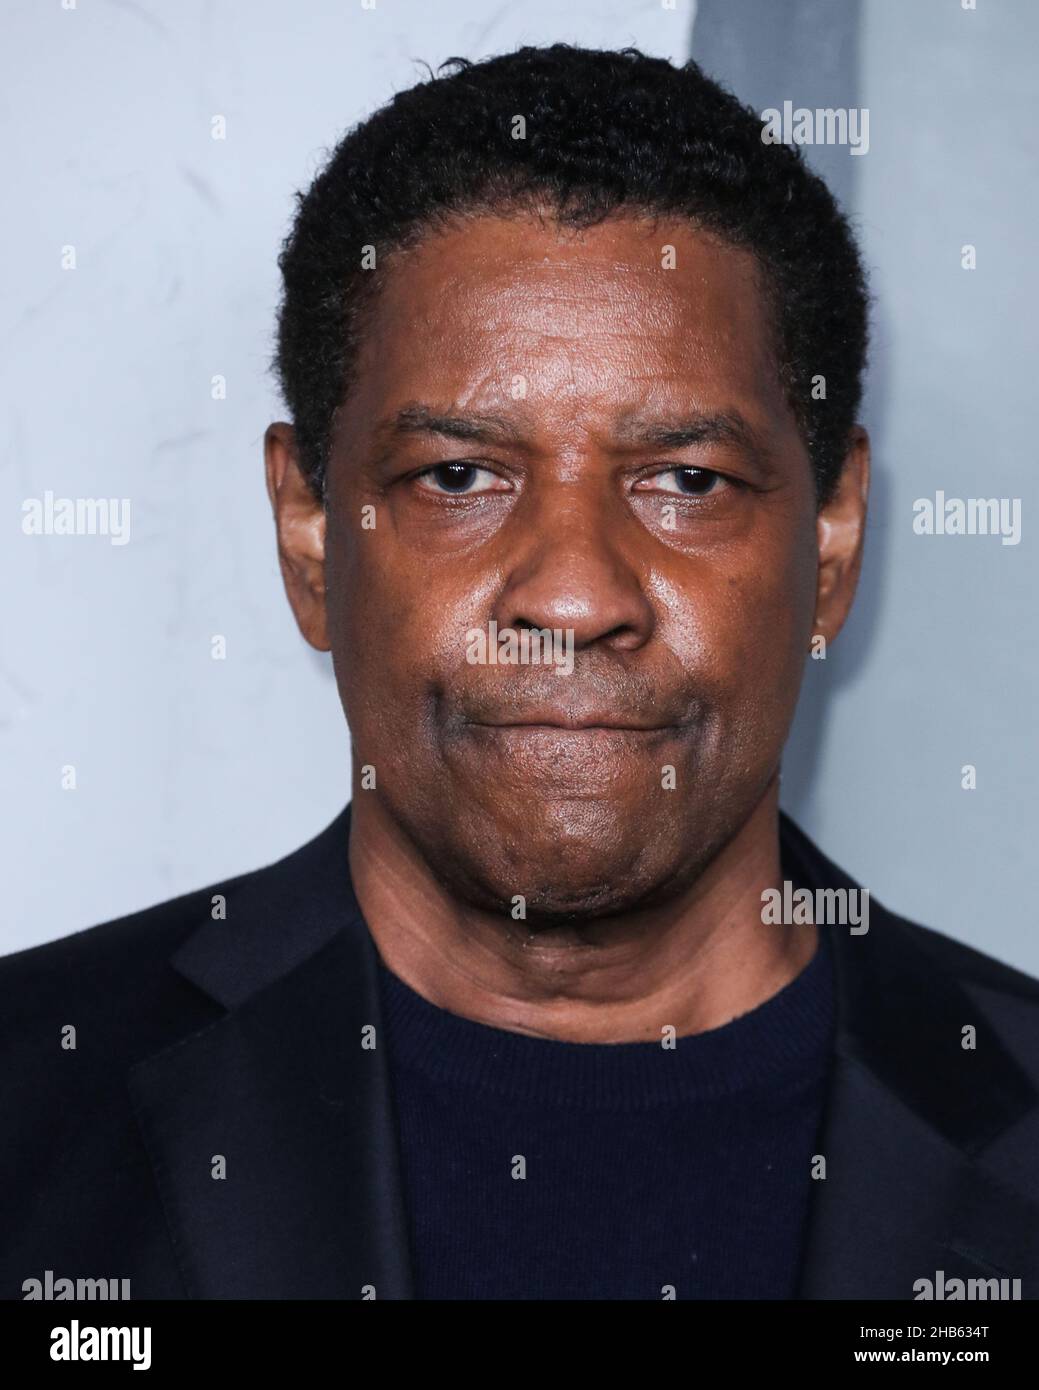 LOS ANGELES, CALIFORNIA, USA - DECEMBER 16: American actor Denzel Washington arrives at the Los Angeles Premiere Of Apple Original Films' and A24's 'The Tragedy Of Macbeth' held at the Directors Guild of America Theater Complex on December 16, 2021 in Los Angeles, California, USA. (Photo by Xavier Collin/Image Press Agency) Stock Photo